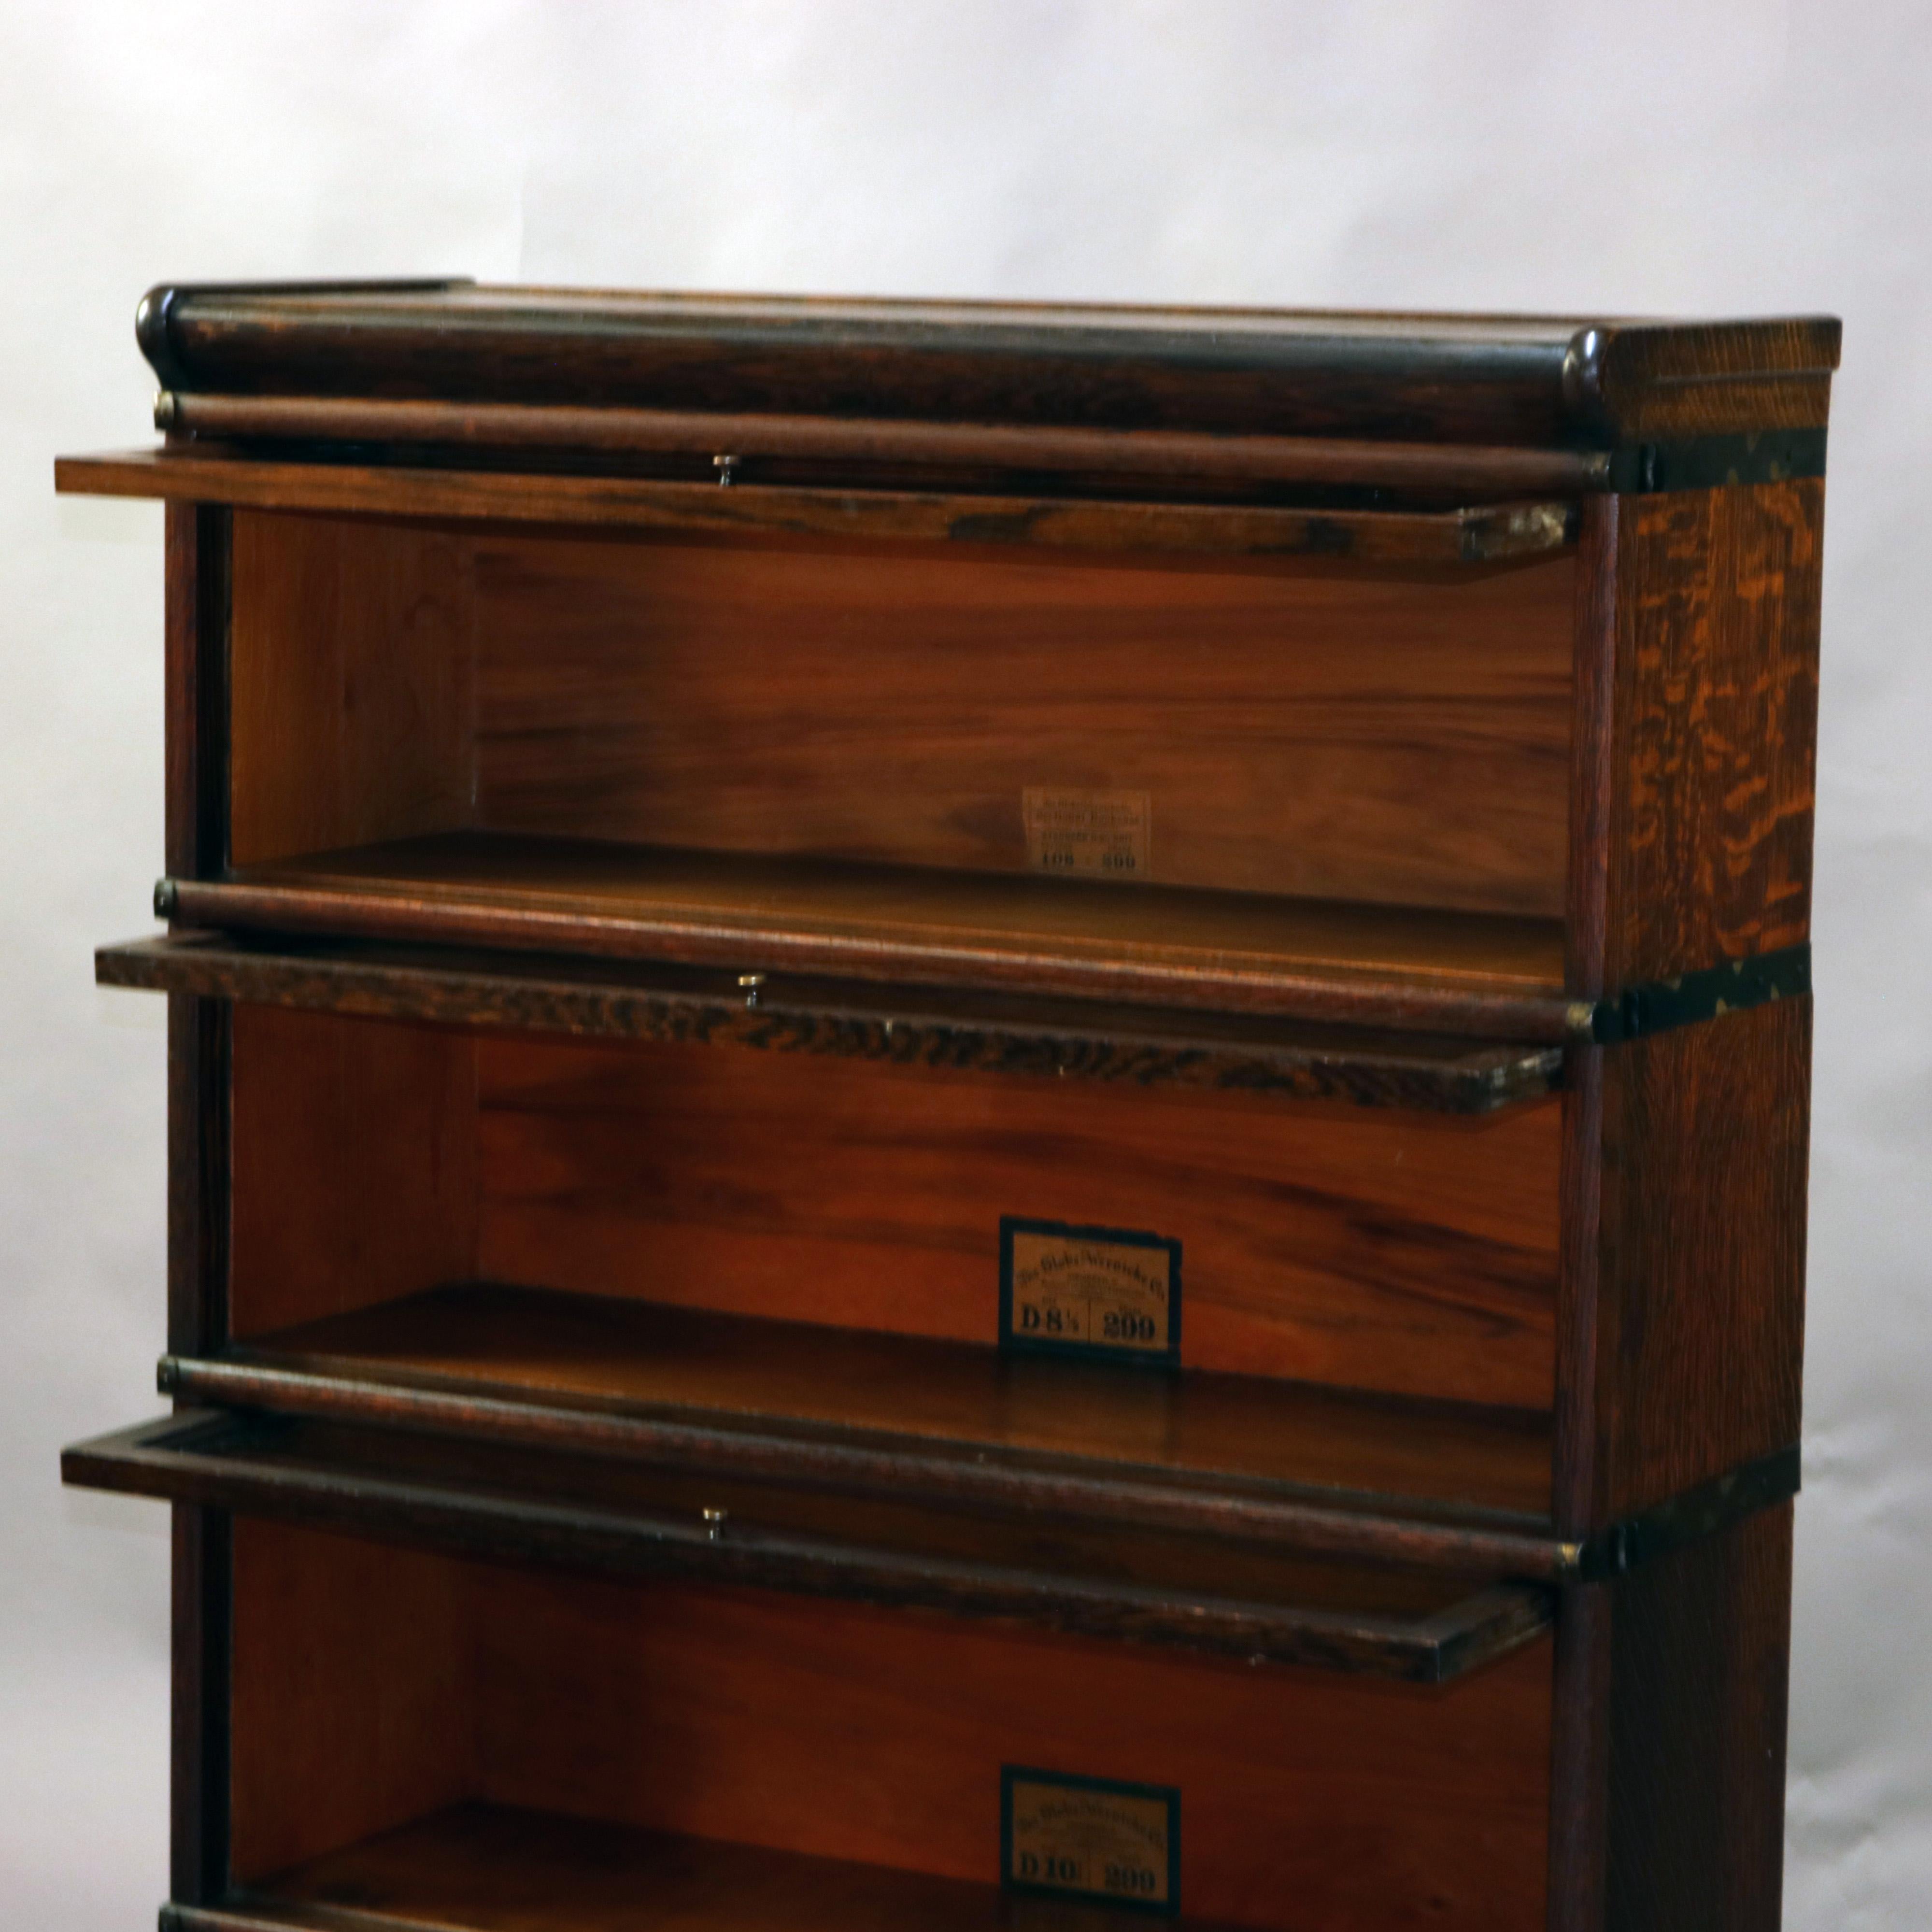 An antique Arts & Crafts barrister bookcase by Globe Wernicke offers oak construction with four stacks, base and crown, slide out glass doors, original labels as photographed, circa 1920

Measures: 58